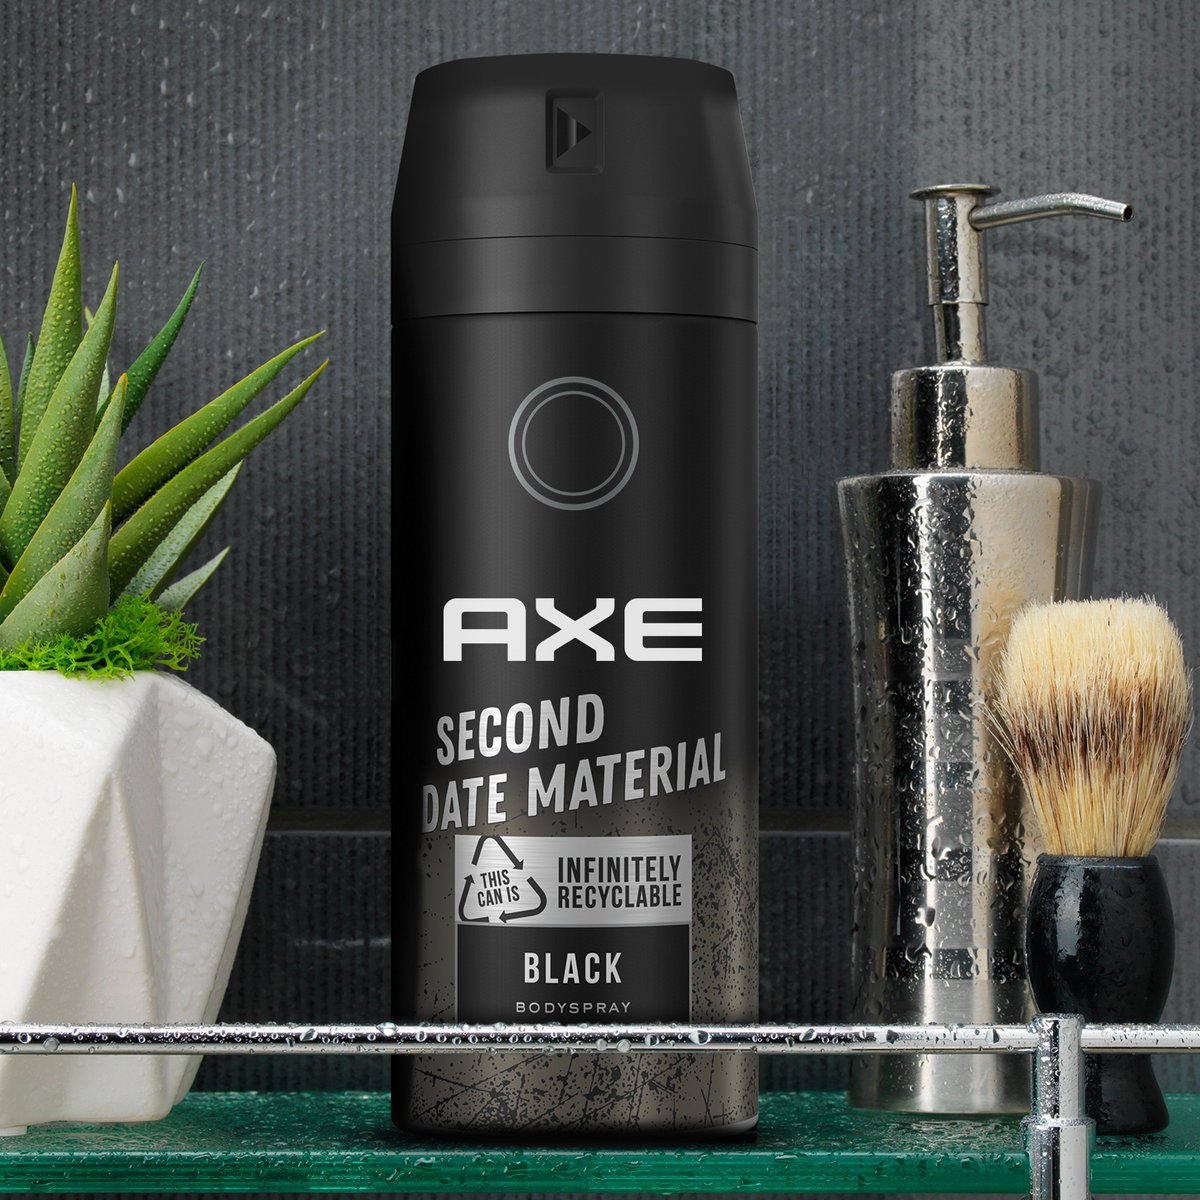 Axe cans are infinitely recyclable. Just like that one pick up line you’ve been sending everyone you match with #RecyclingDay